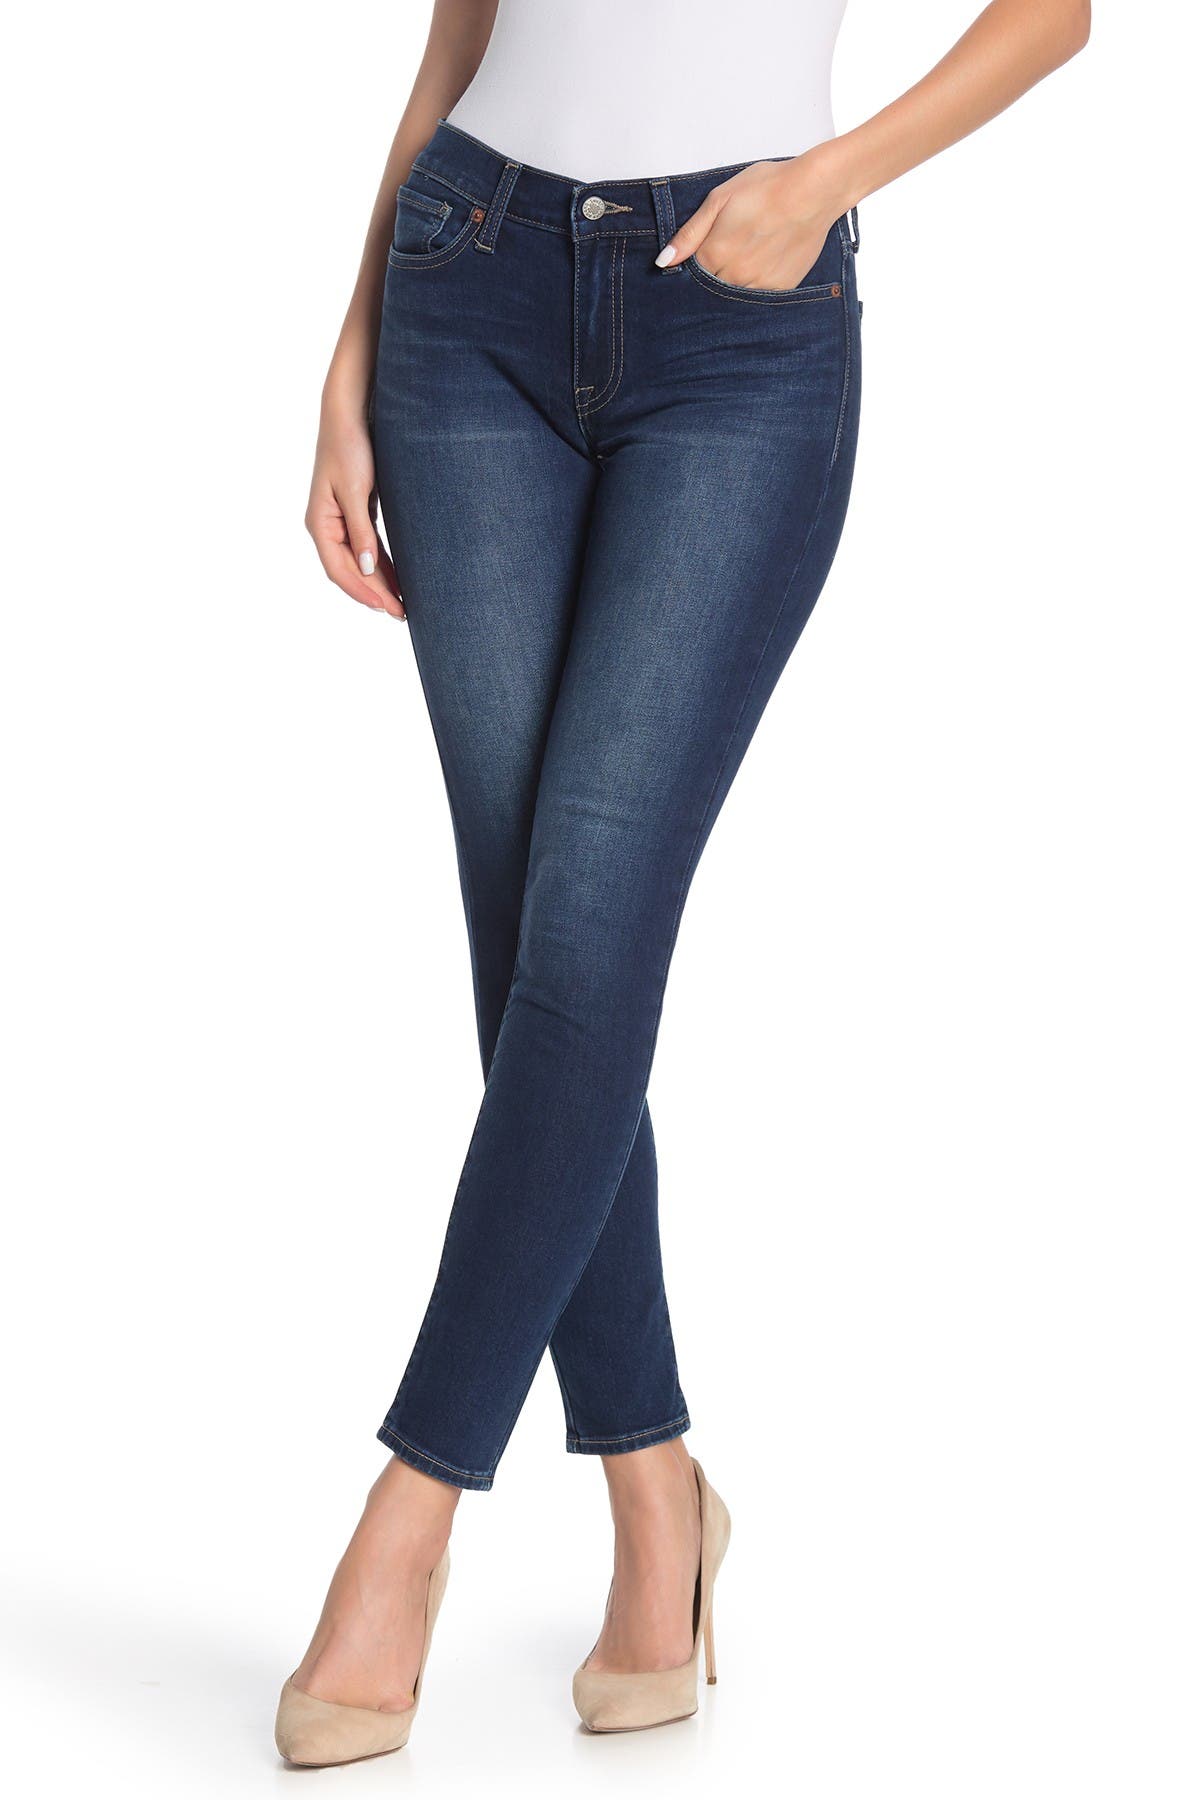 lucky brand brooke jeans